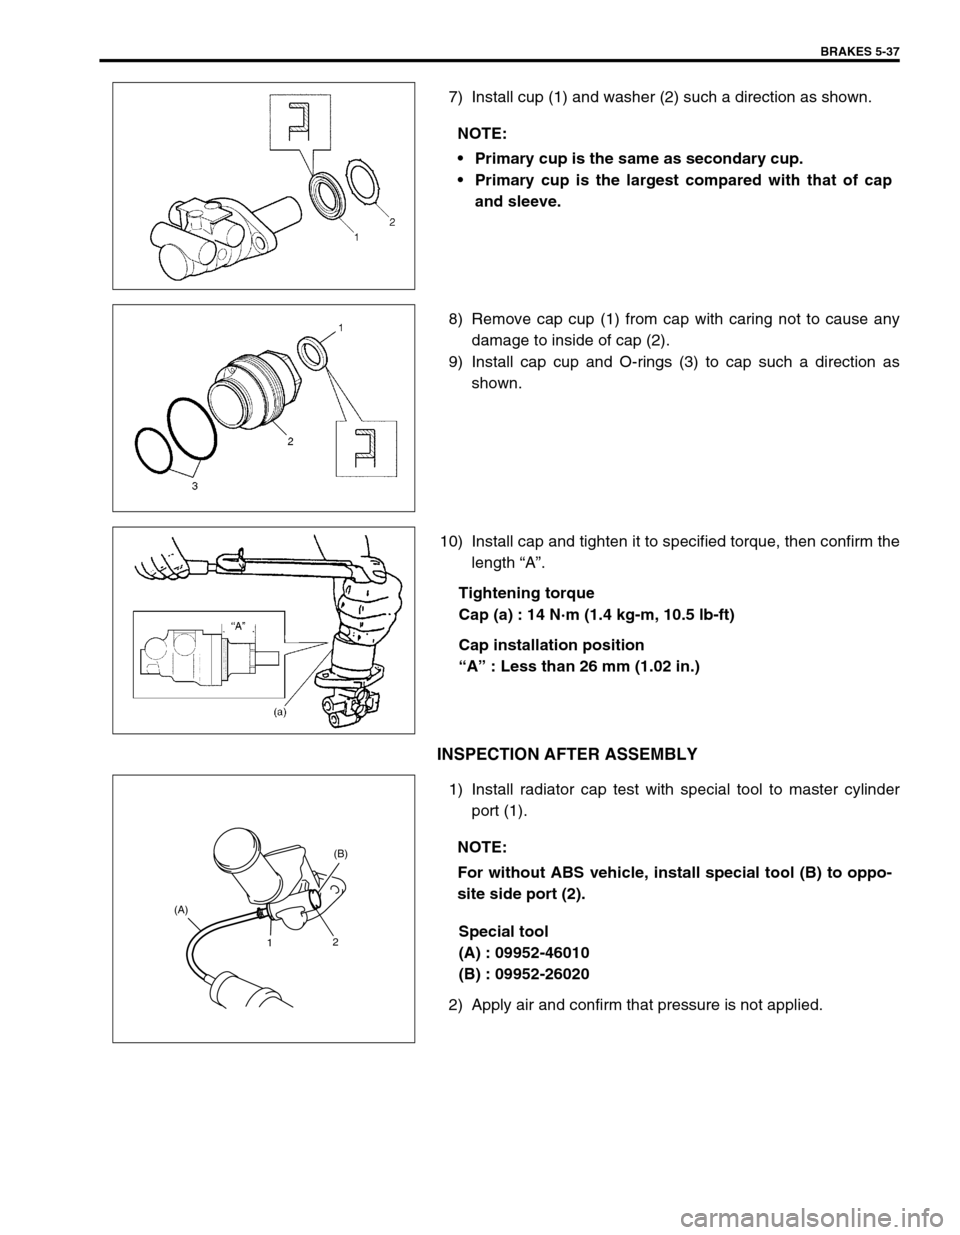 SUZUKI SWIFT 2000 1.G RG413 Service Workshop Manual BRAKES 5-37
7) Install cup (1) and washer (2) such a direction as shown.
8) Remove cap cup (1) from cap with caring not to cause any
damage to inside of cap (2).
9) Install cap cup and O-rings (3) to 